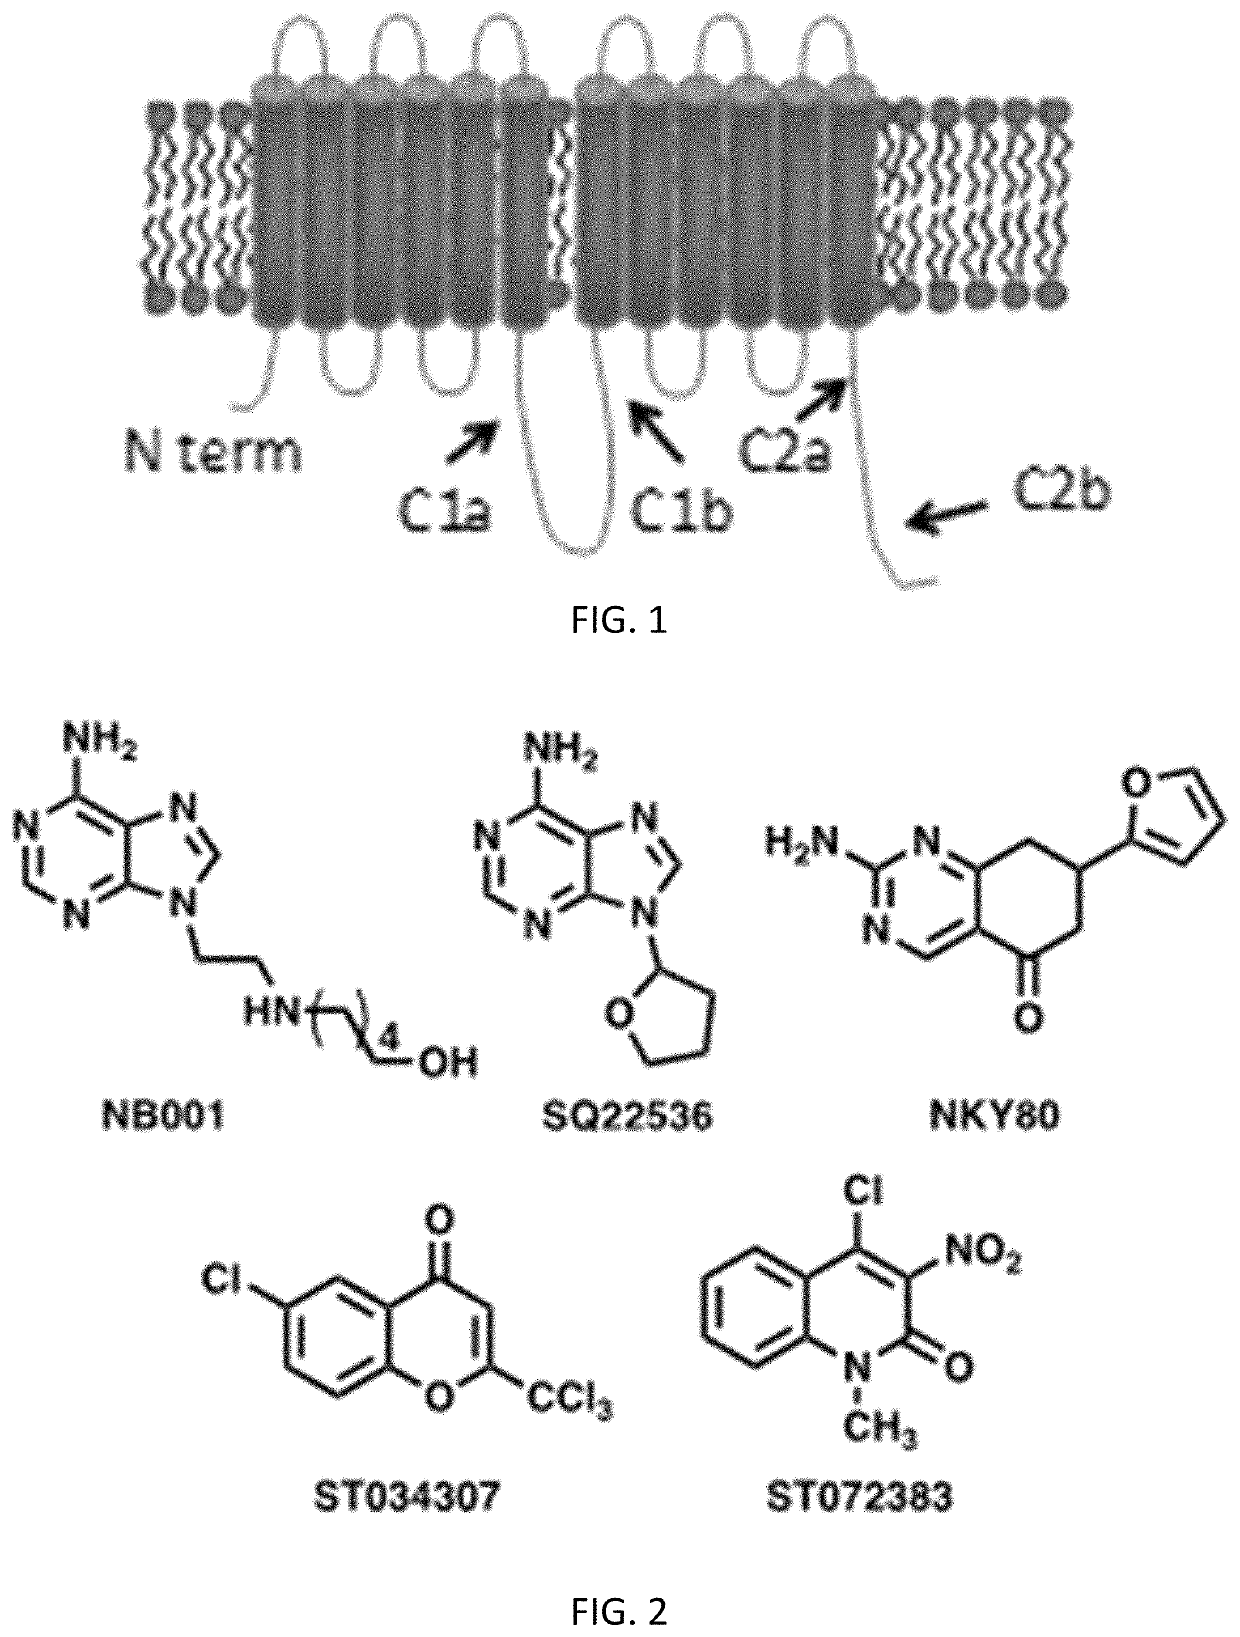 Scaffold of adenylyl cyclase inhibitors for chronic pain and opioid dependence